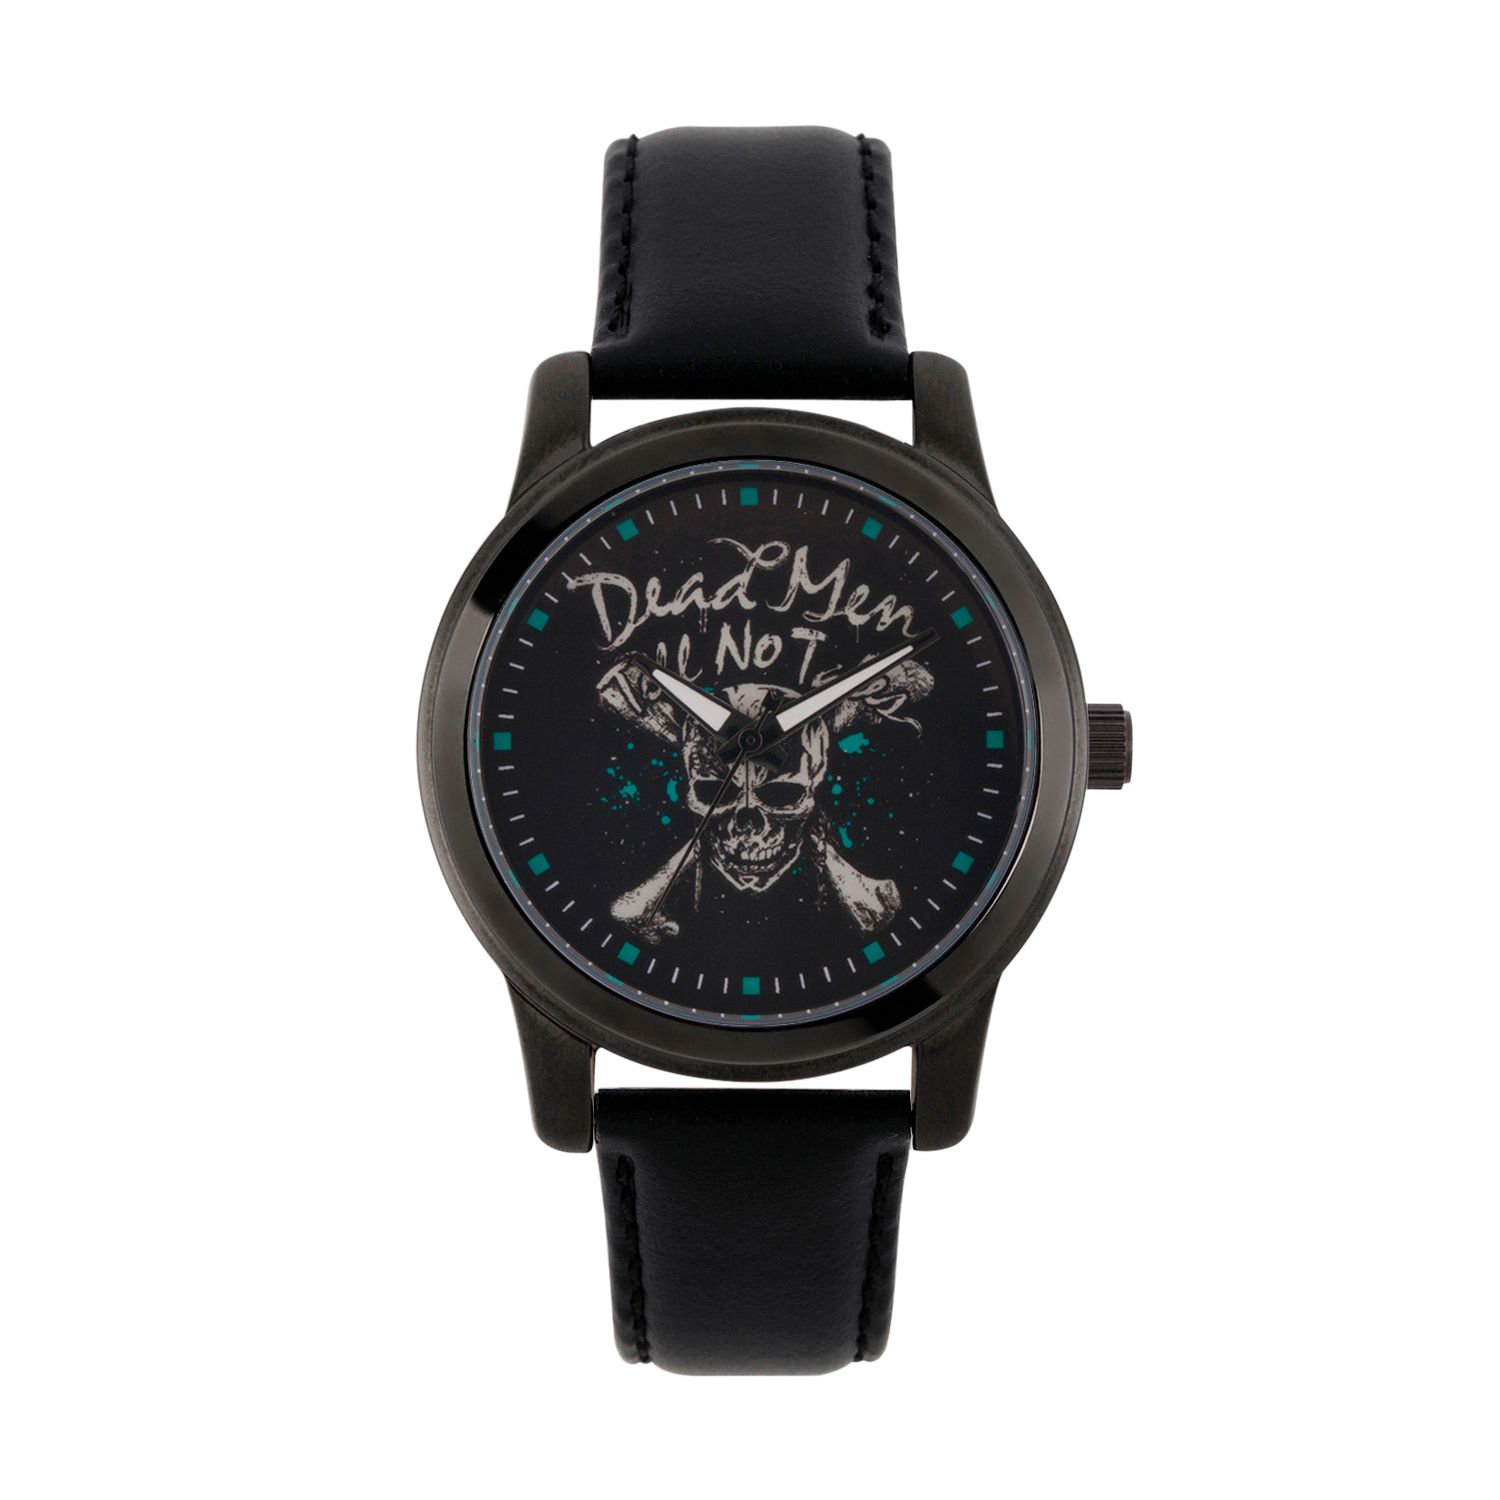 Image for Disney 's Pirates Of The Caribbean: Dead Men Tell No Tales Men's Leather Watch at Kohl's.